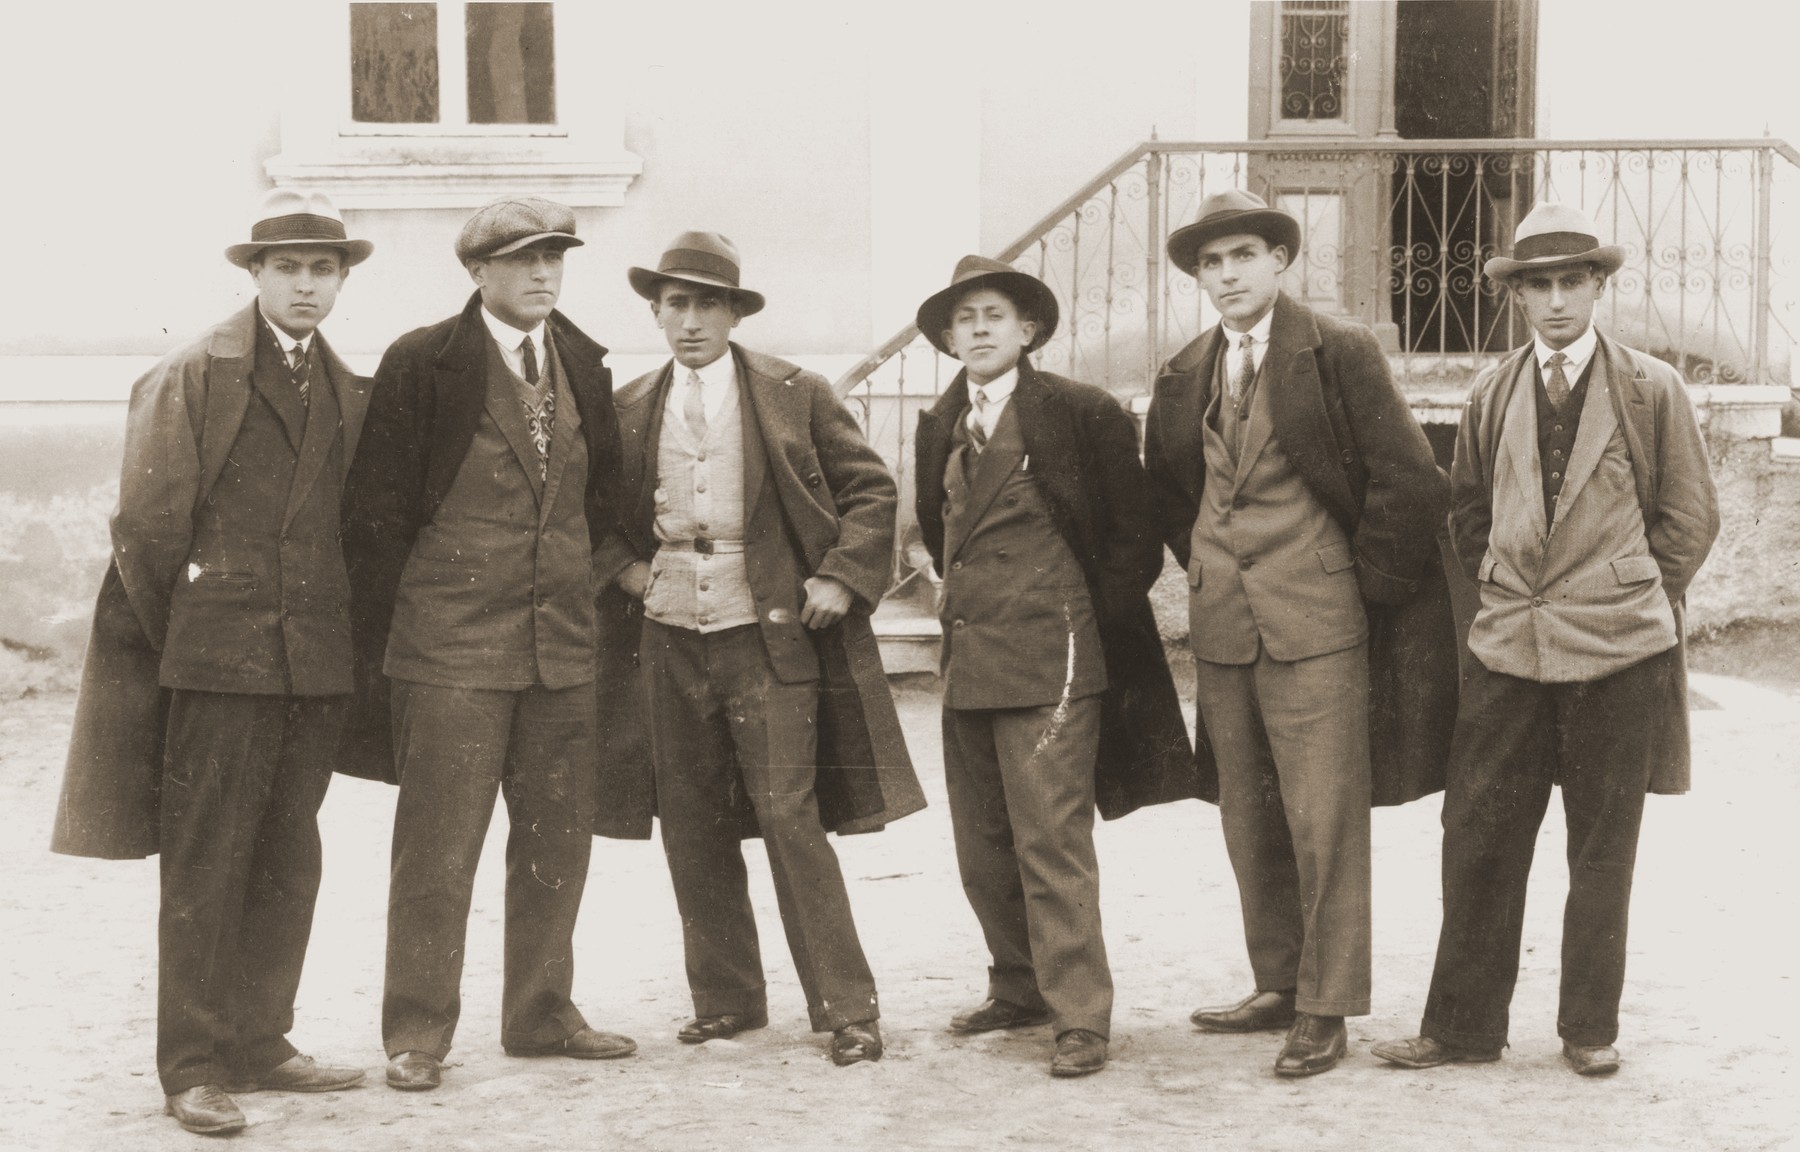 A group of young Jewish men in jackets and ties pose outside a building in Bitola, Macedonia.